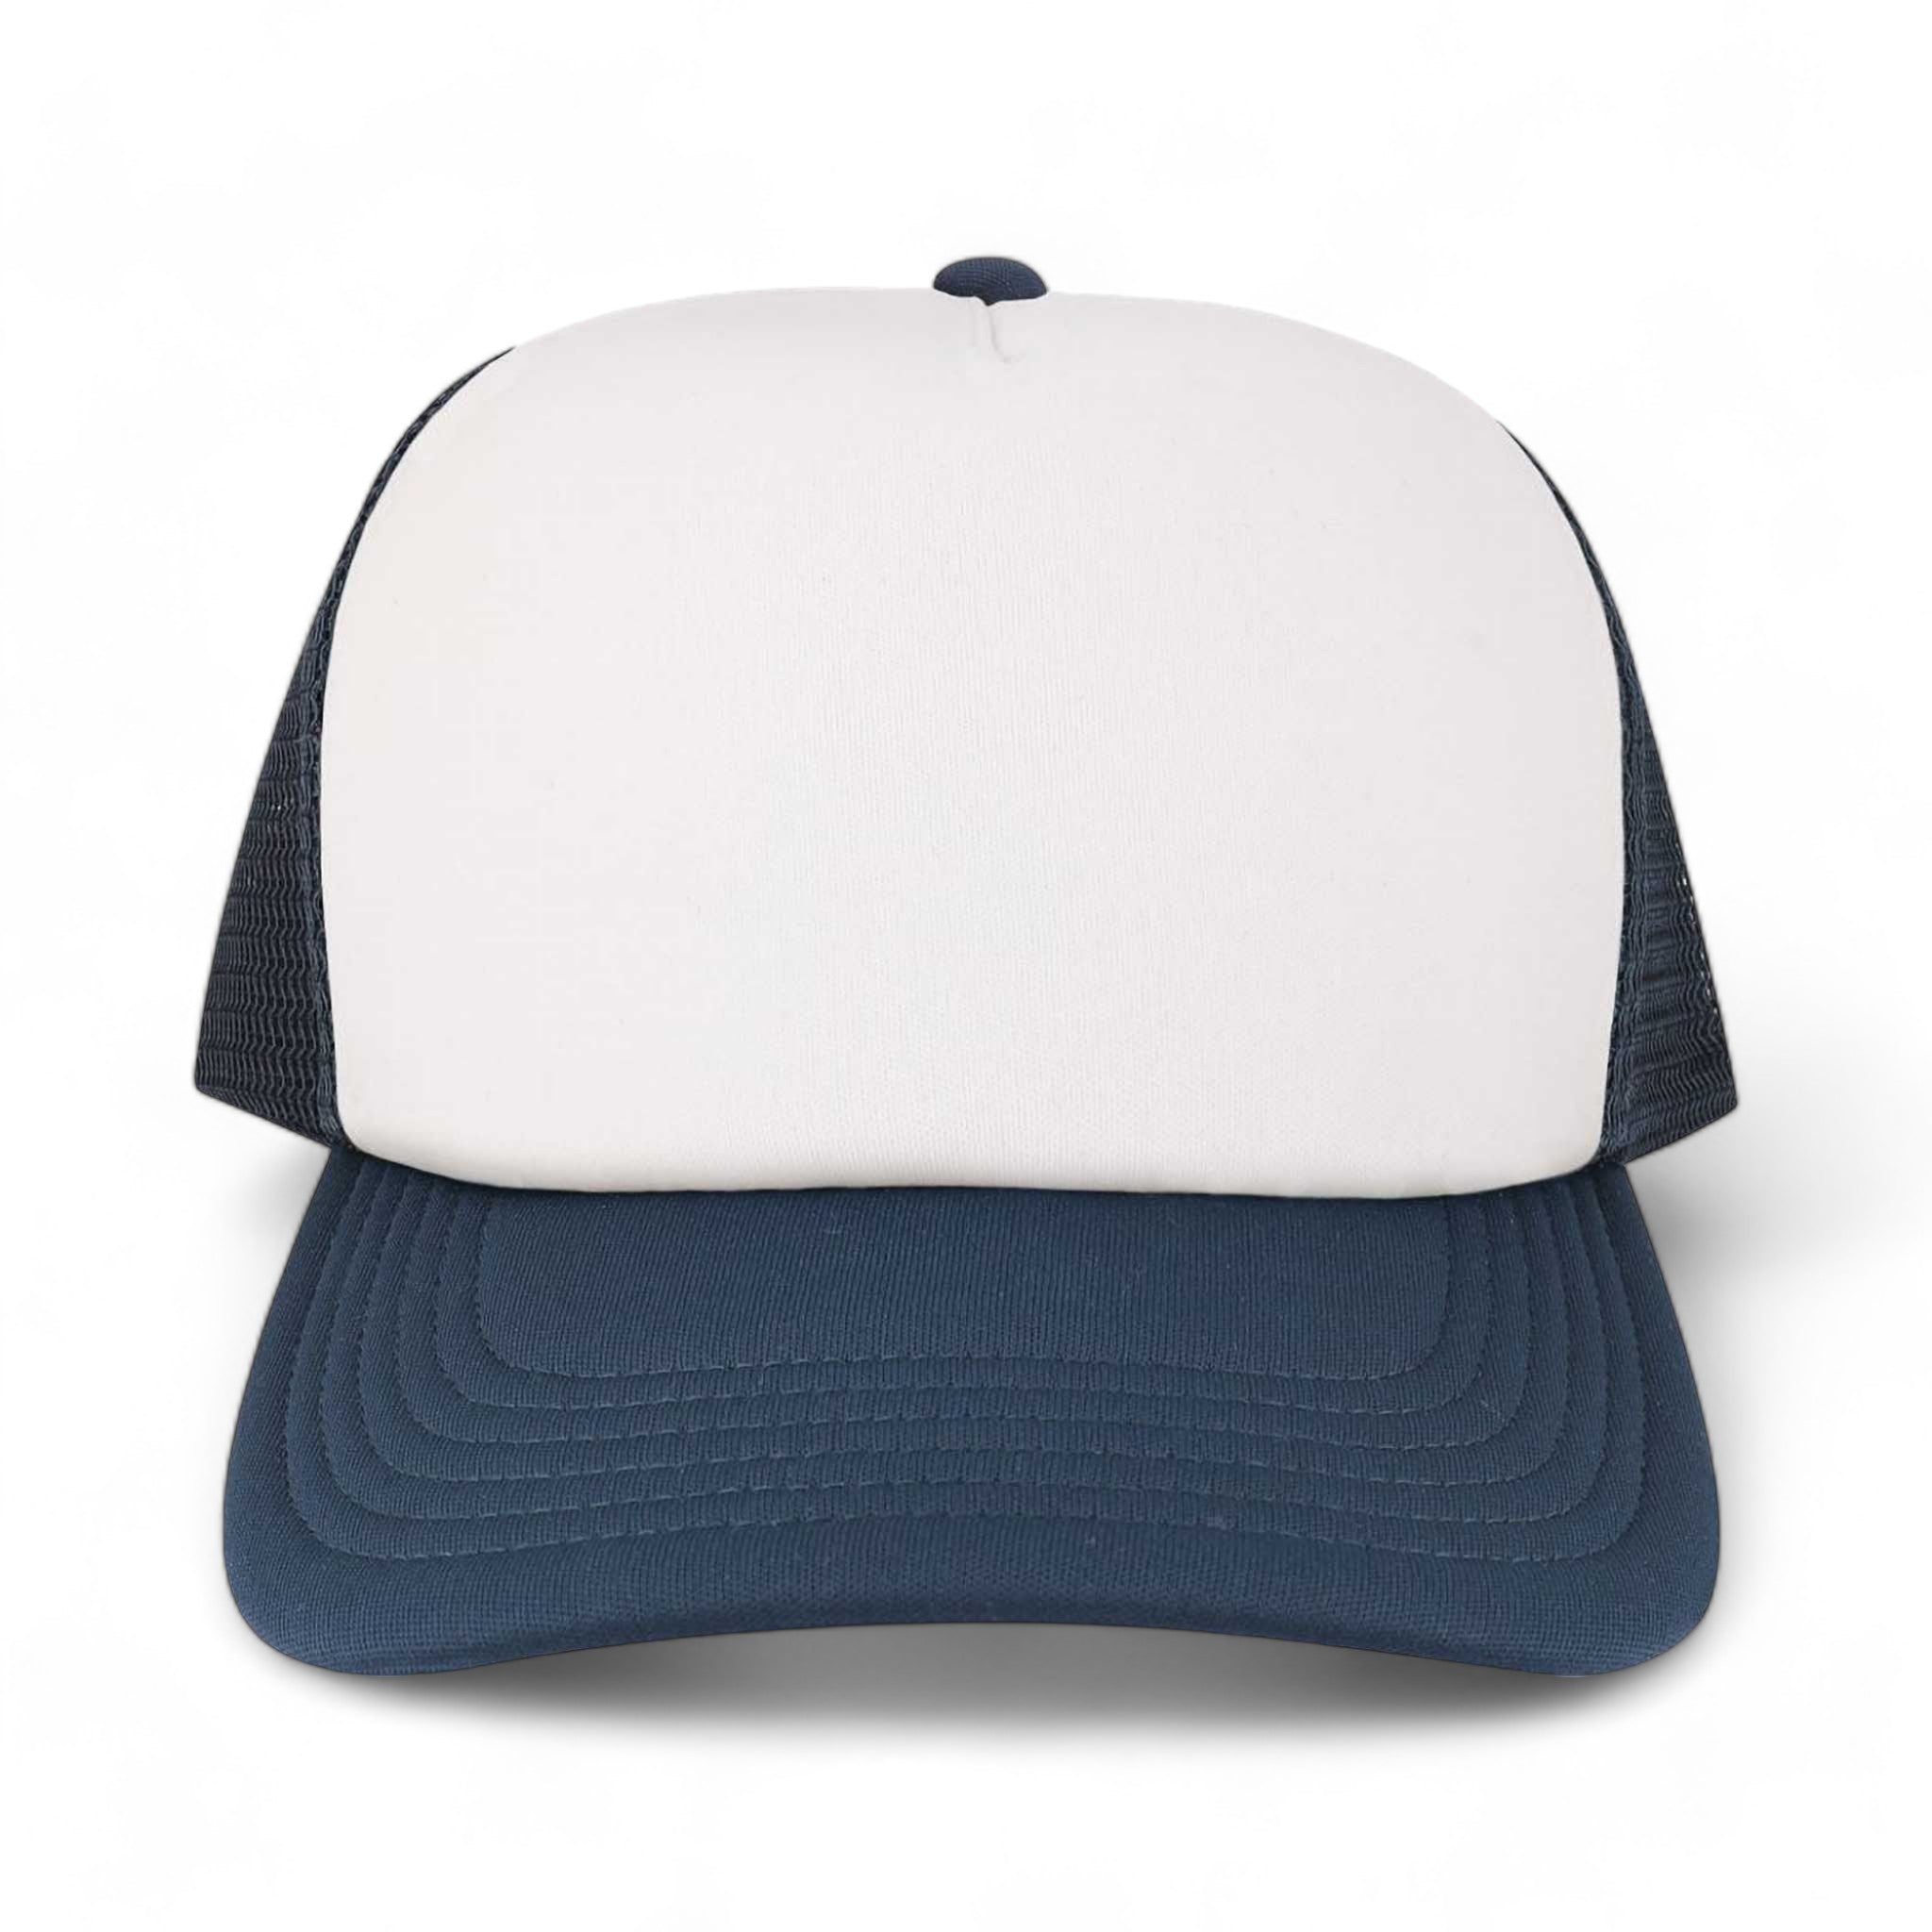 Front view of LEGACY LTA custom hat in white and navy